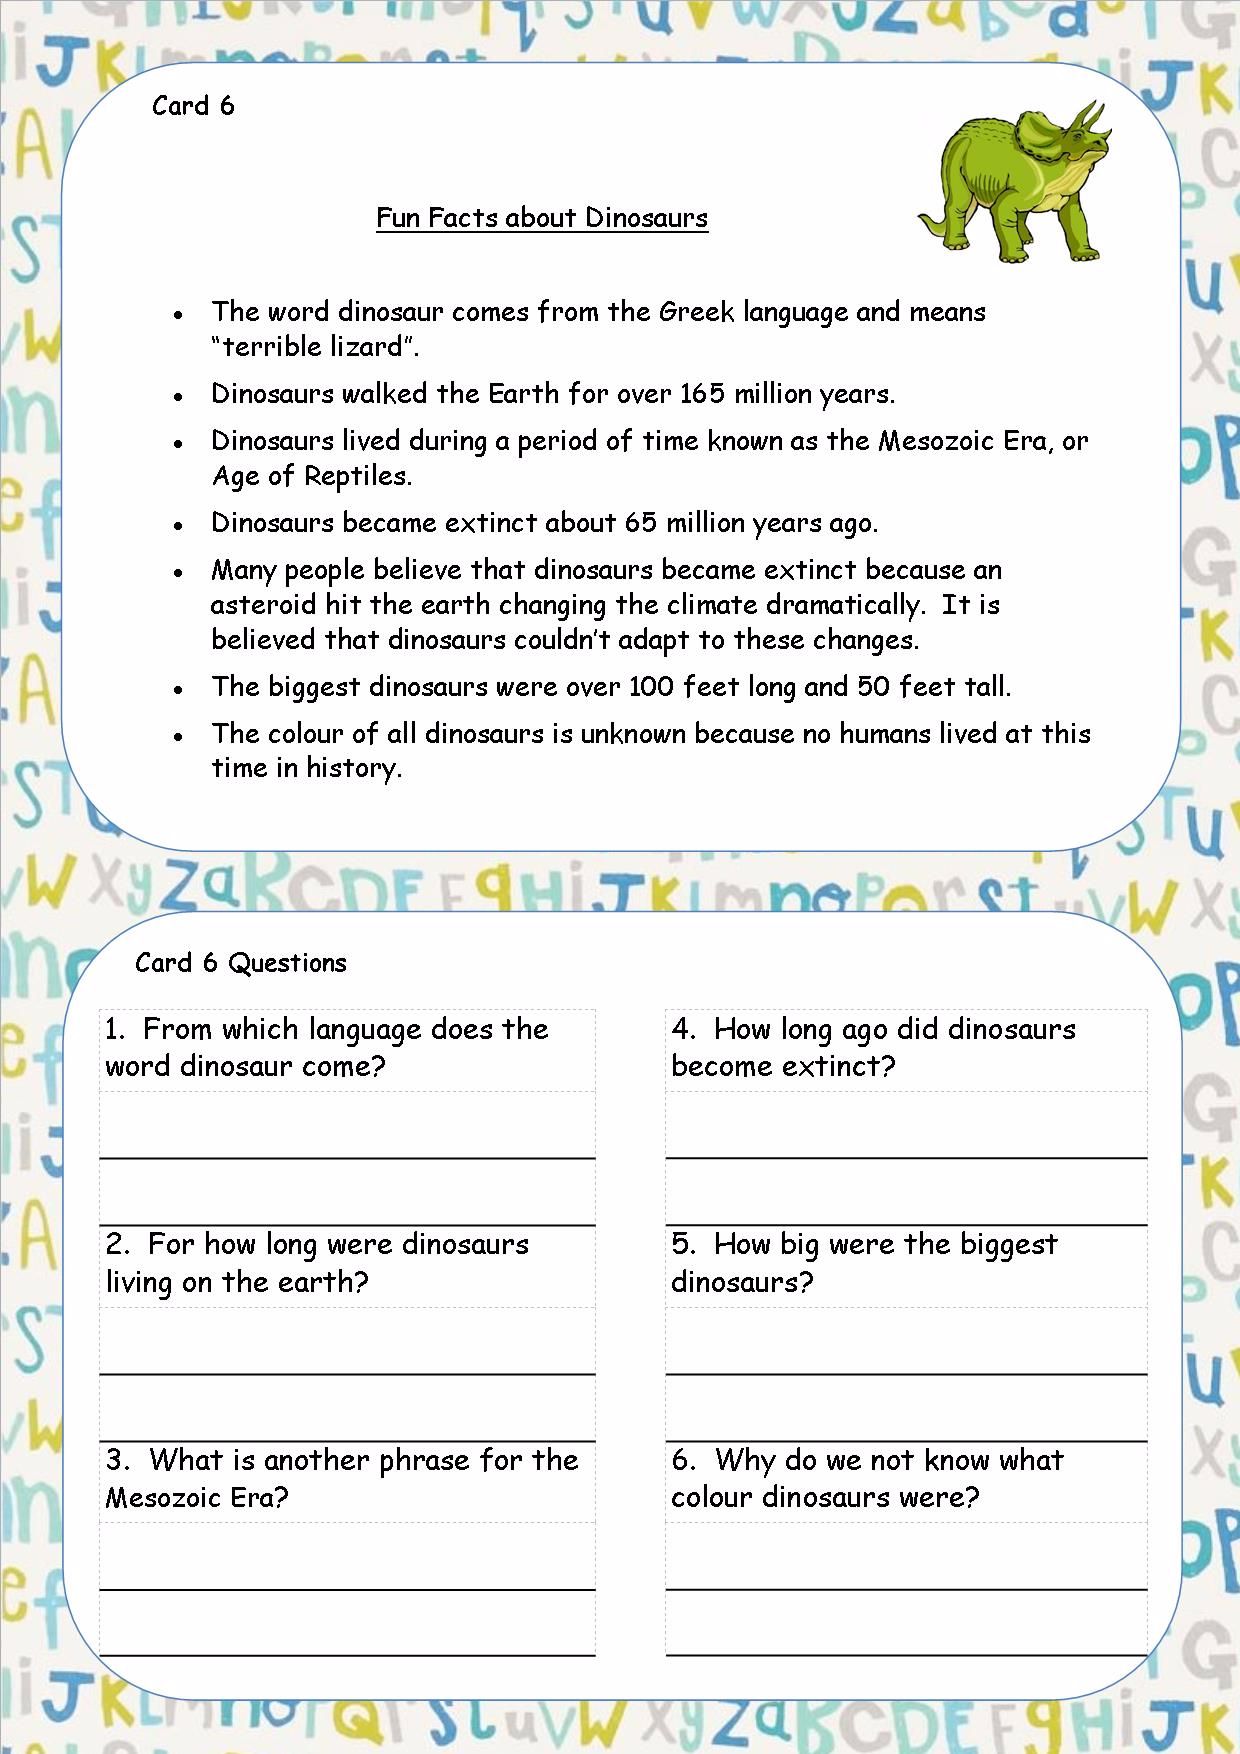 guided-reading-resources-ks2-76e